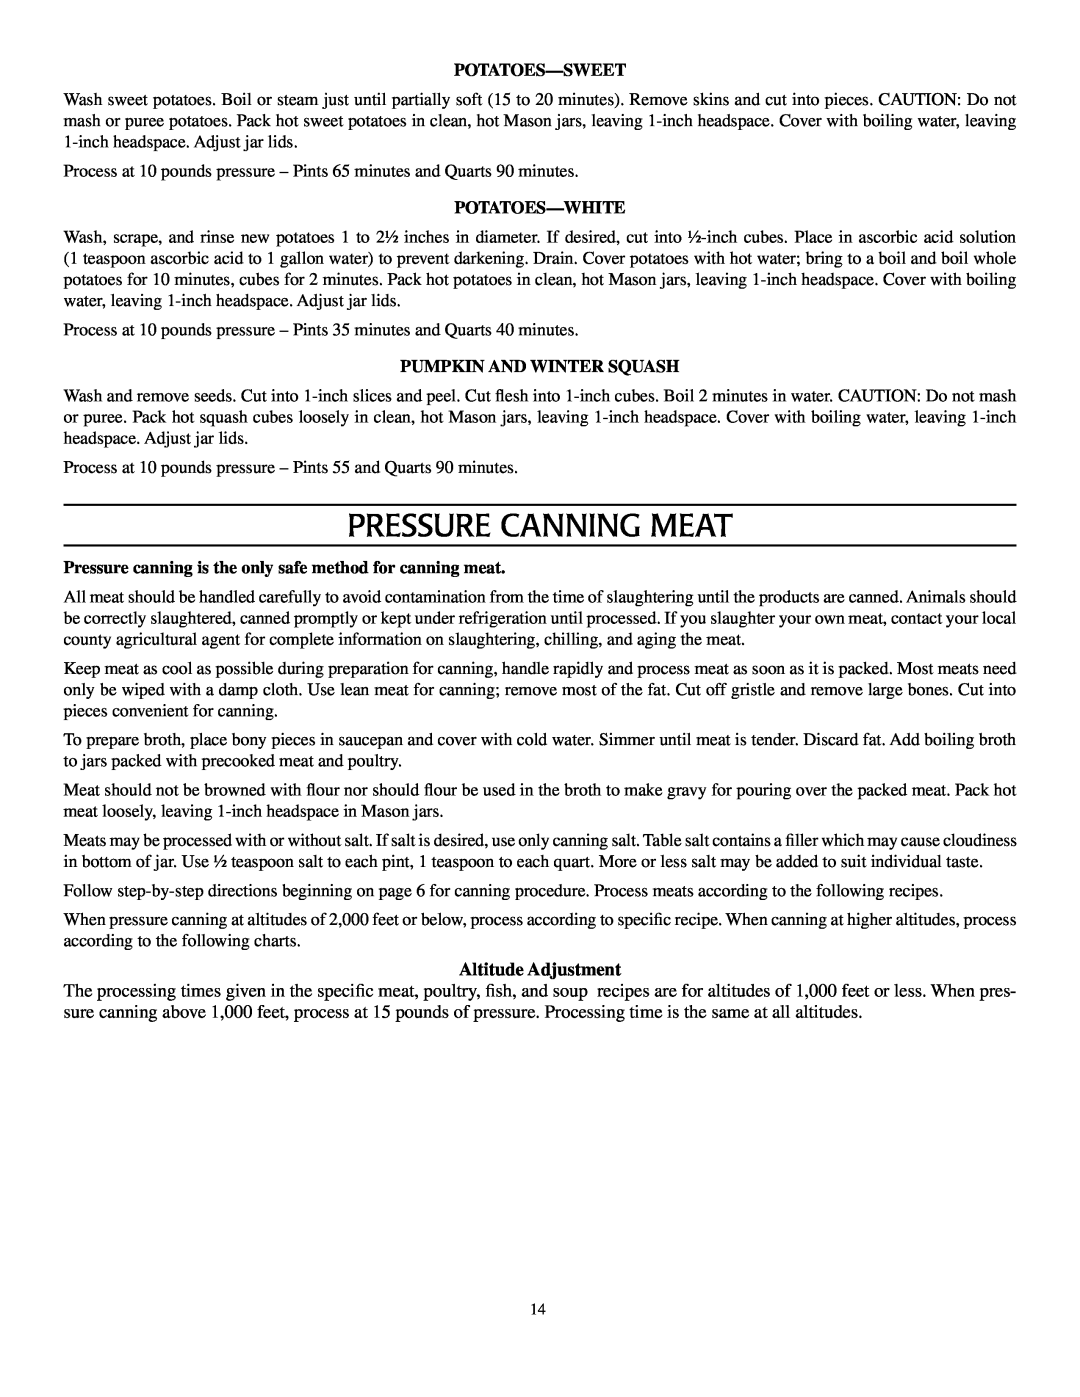 Presto Pressure Canner and Cooker warranty Pressure Canning Meat, Altitude Adjustment, Potatoes-Sweet, Potatoes-White 